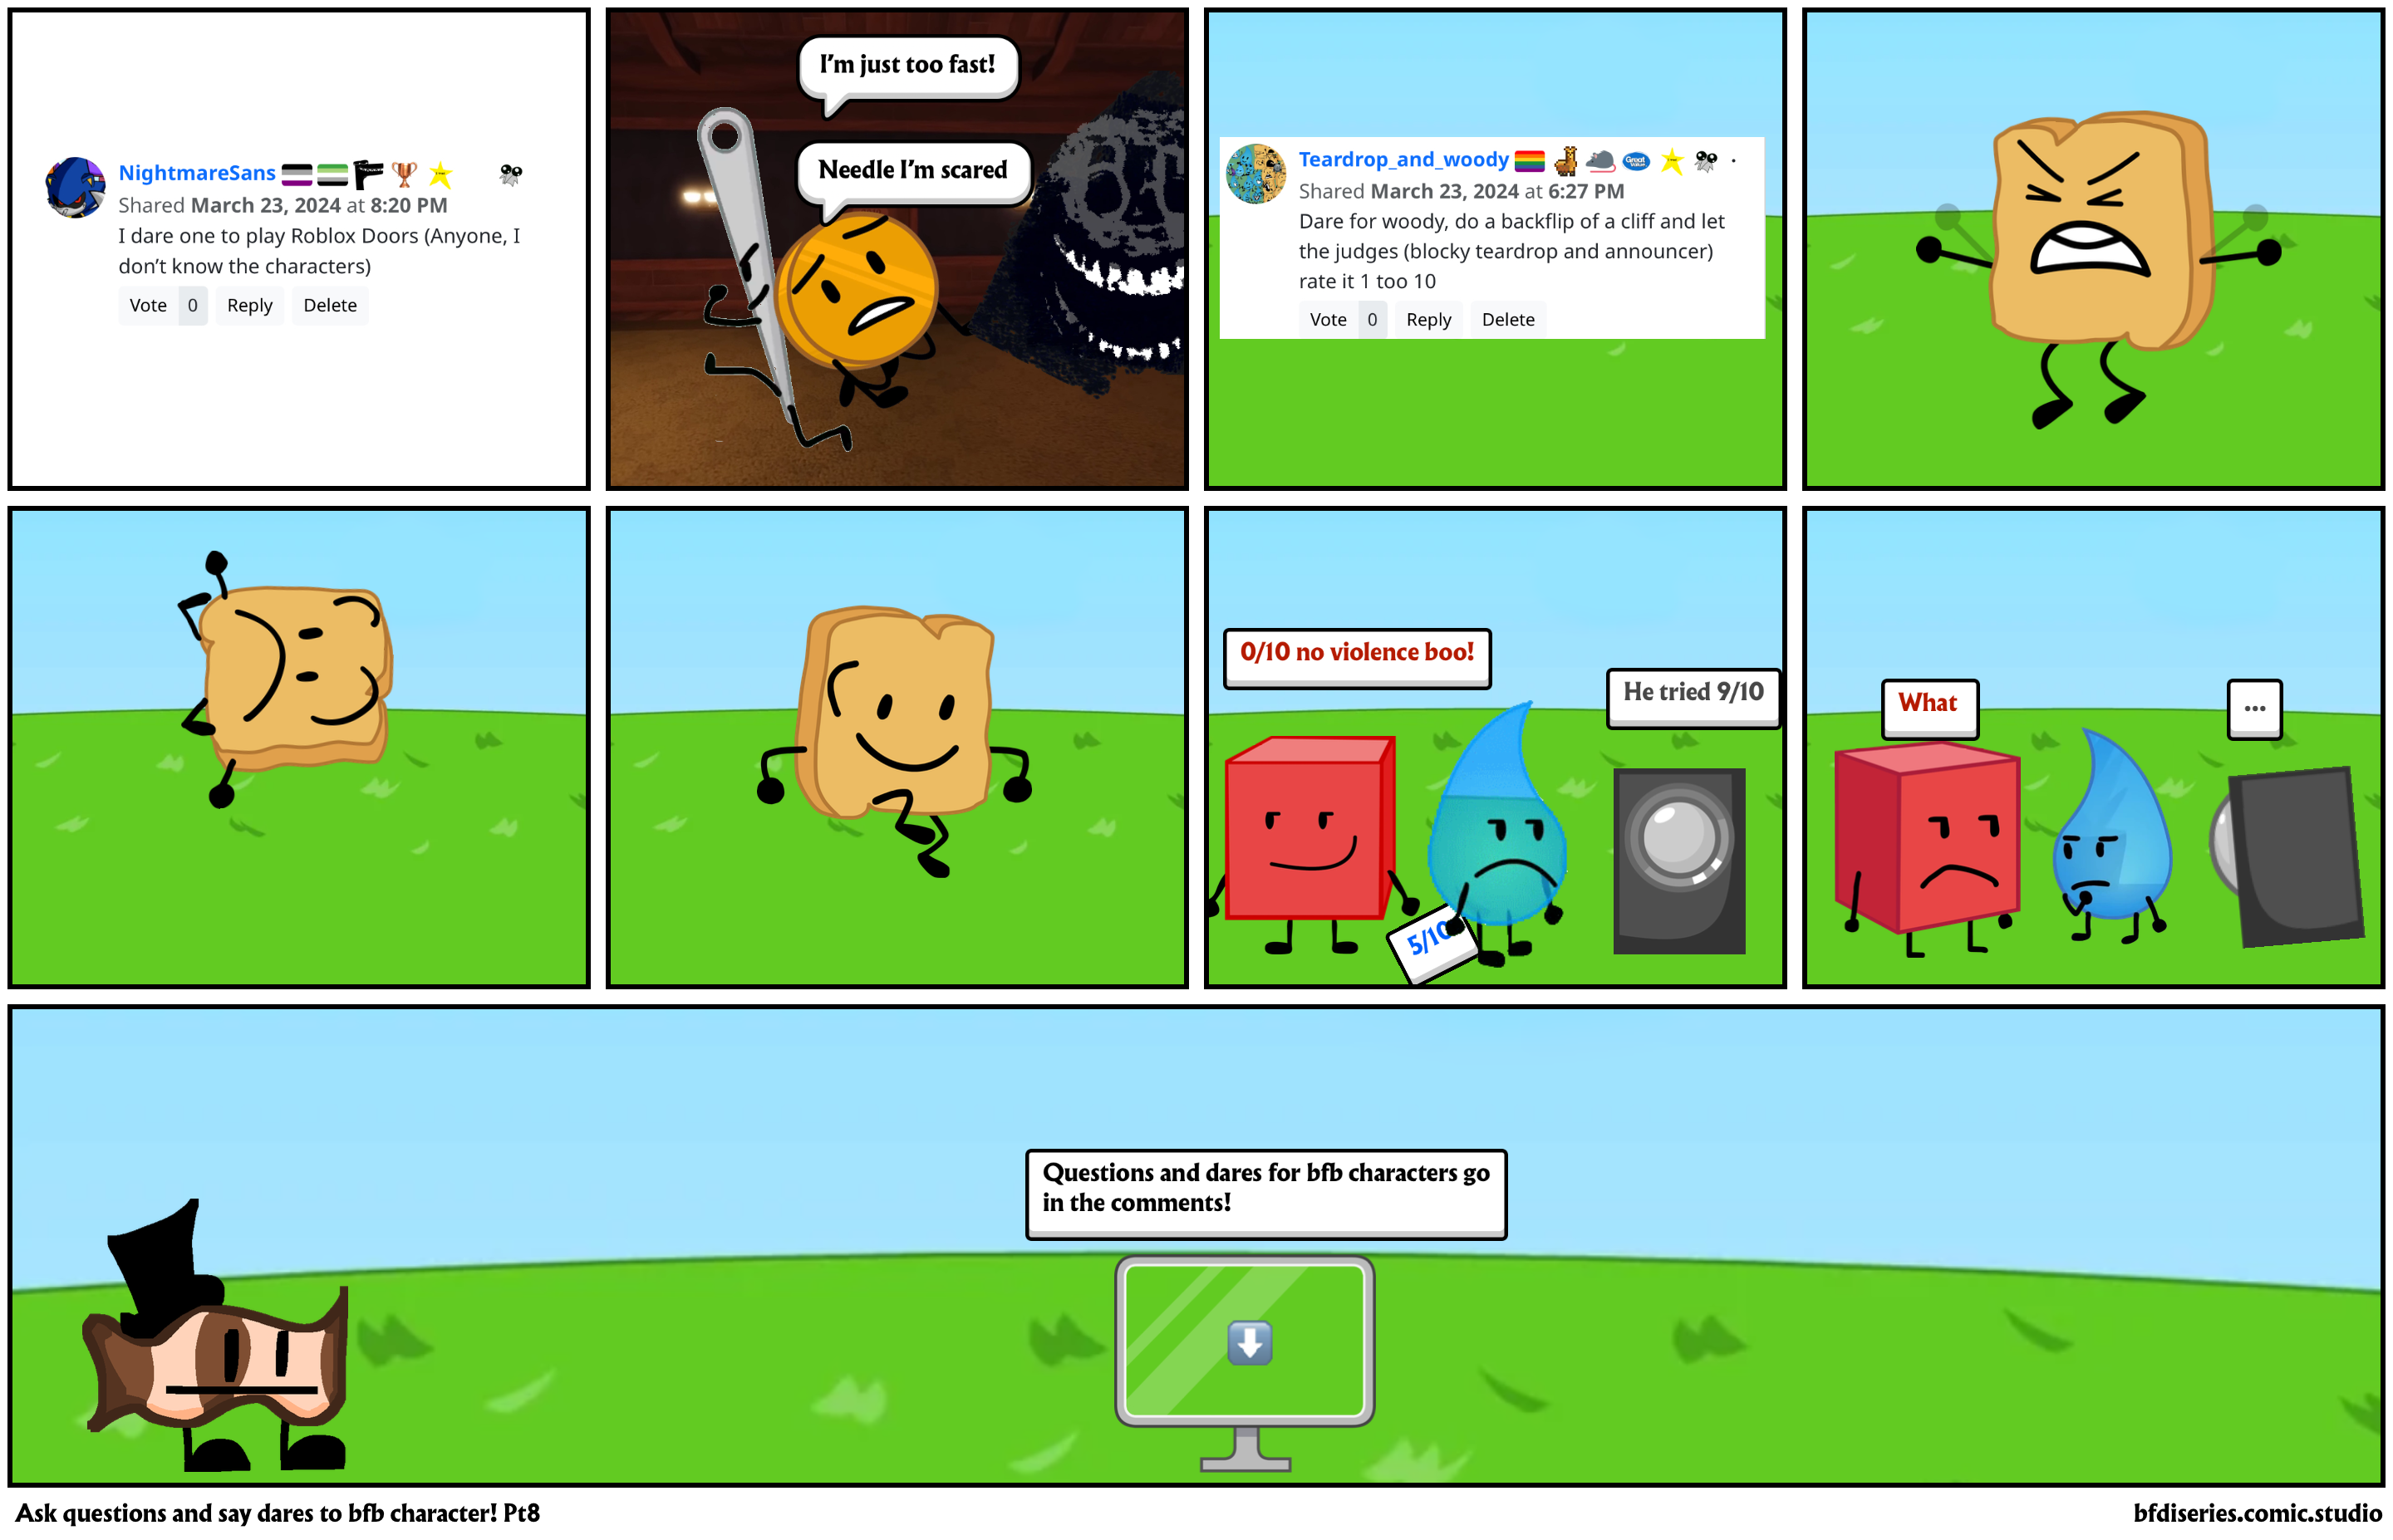  Ask questions and say dares to bfb character! Pt8